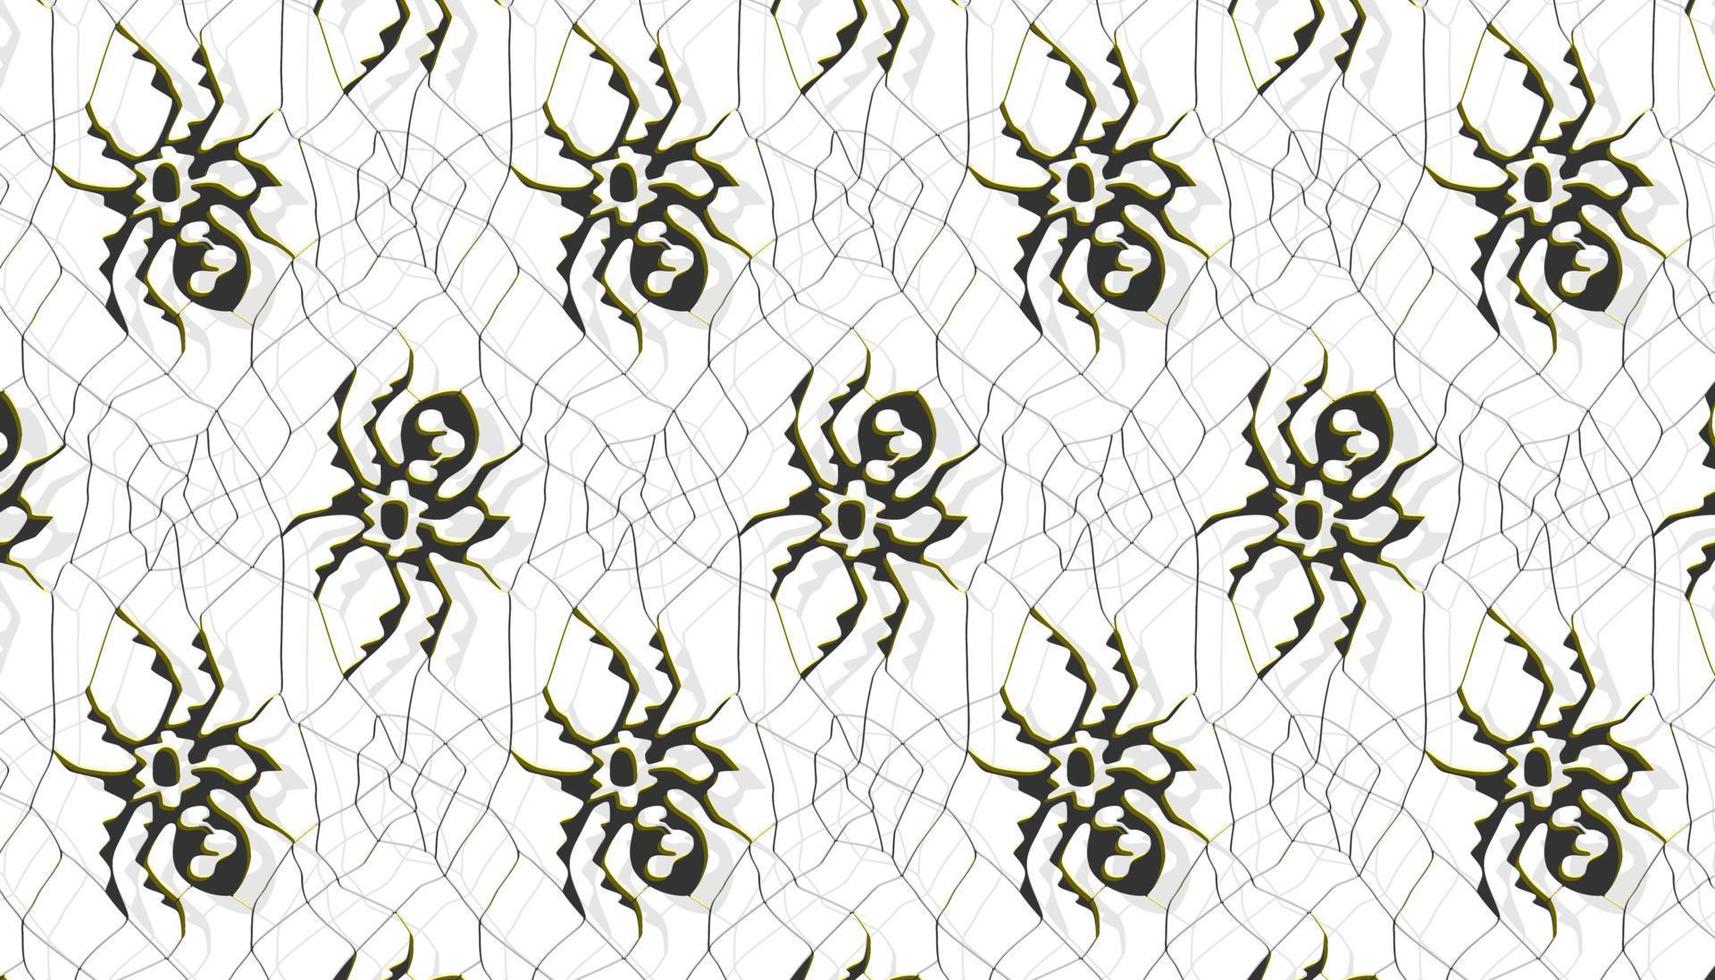 abstract spider on white background vector